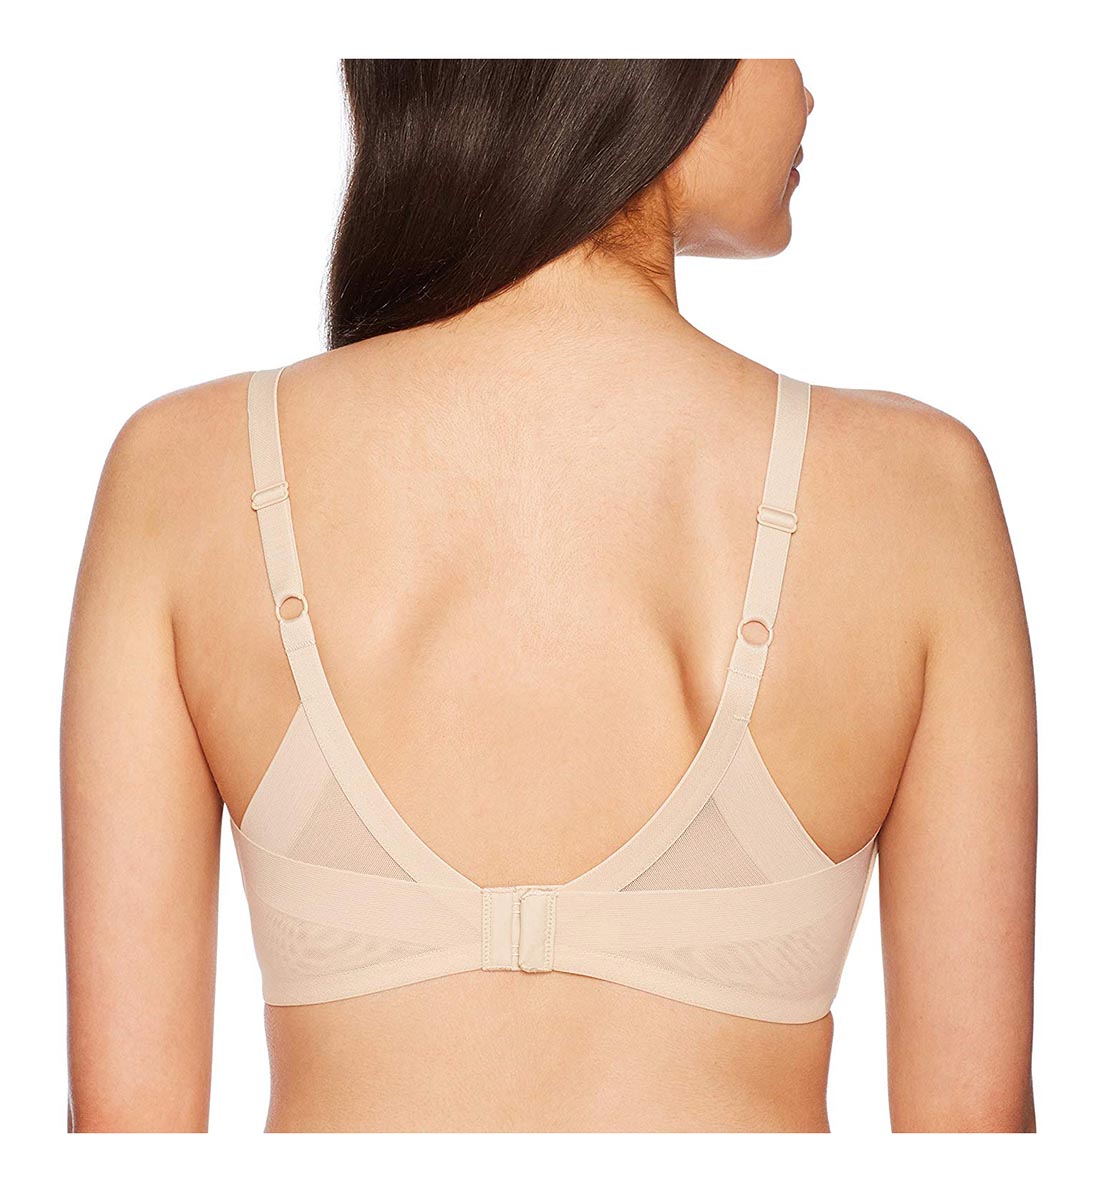 Wacoal Ultimate Side Smoother Wire Free Contour T-Shirt Bra (852281),32D,Sand - Sand,32D